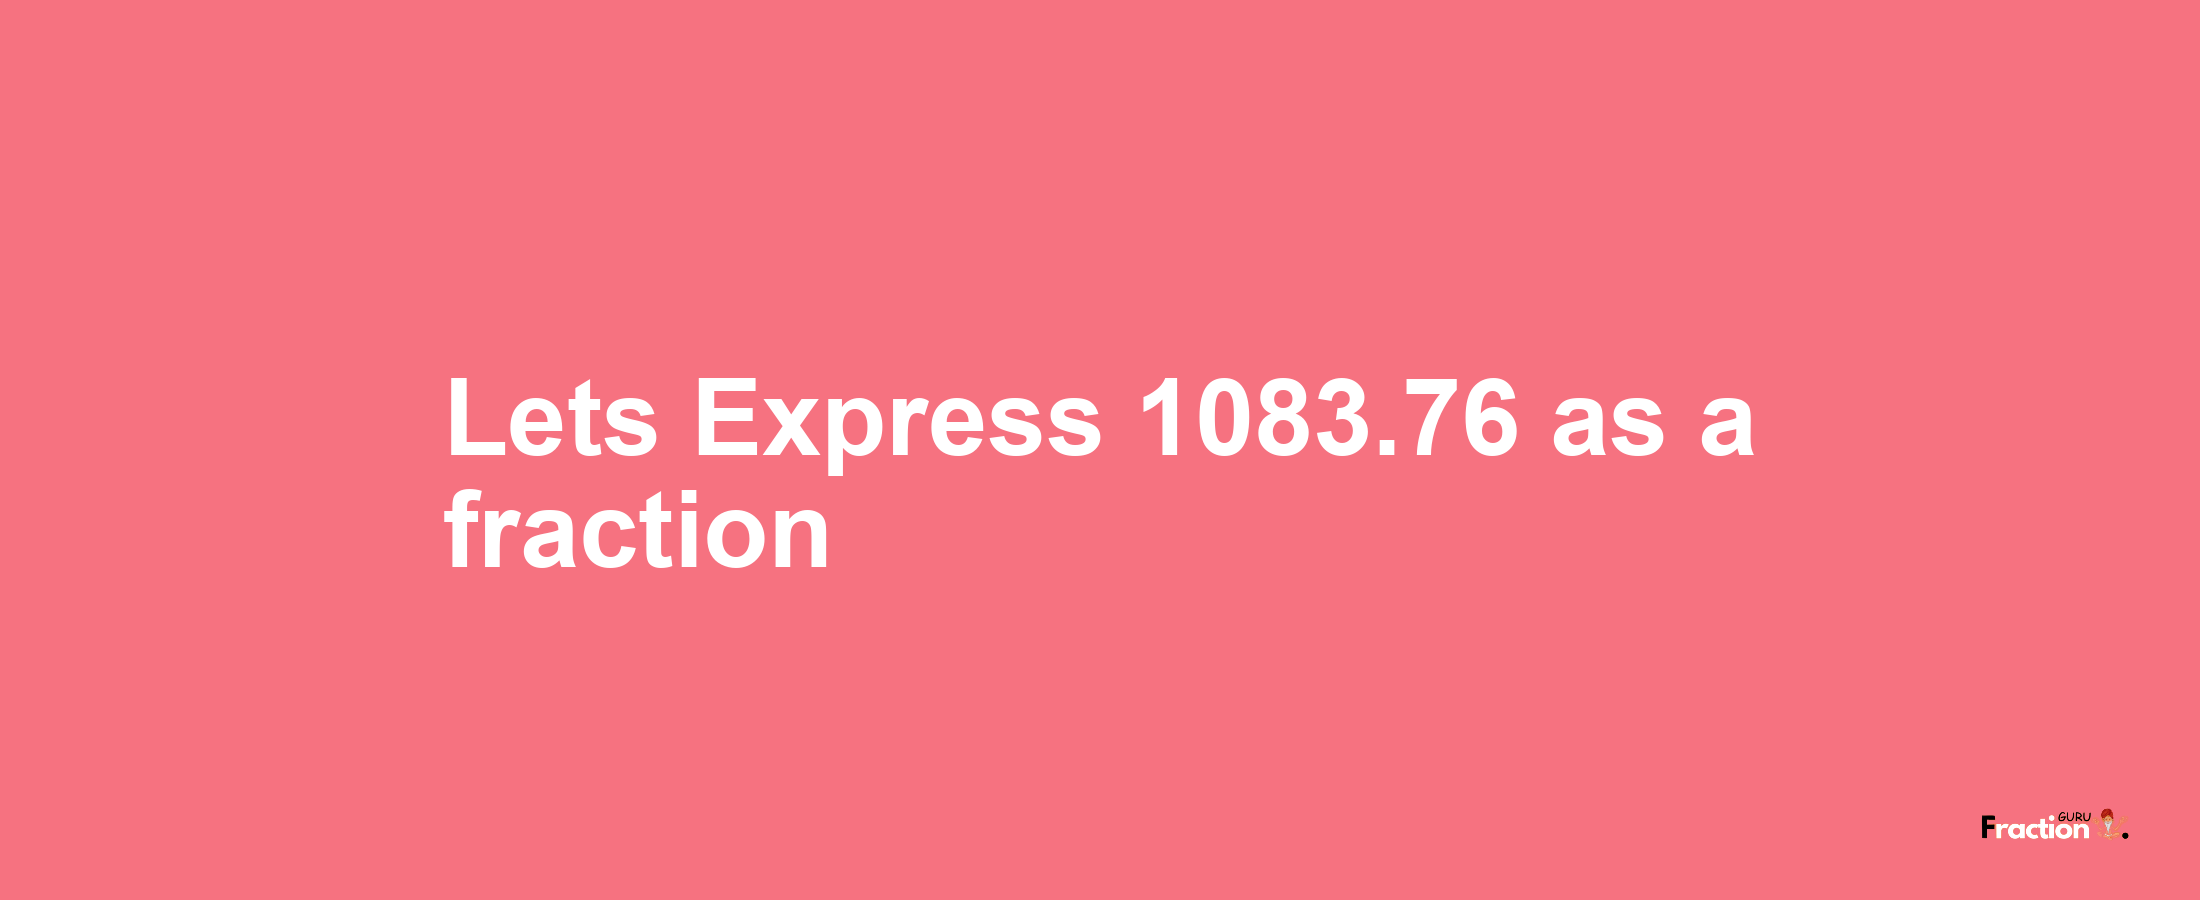 Lets Express 1083.76 as afraction